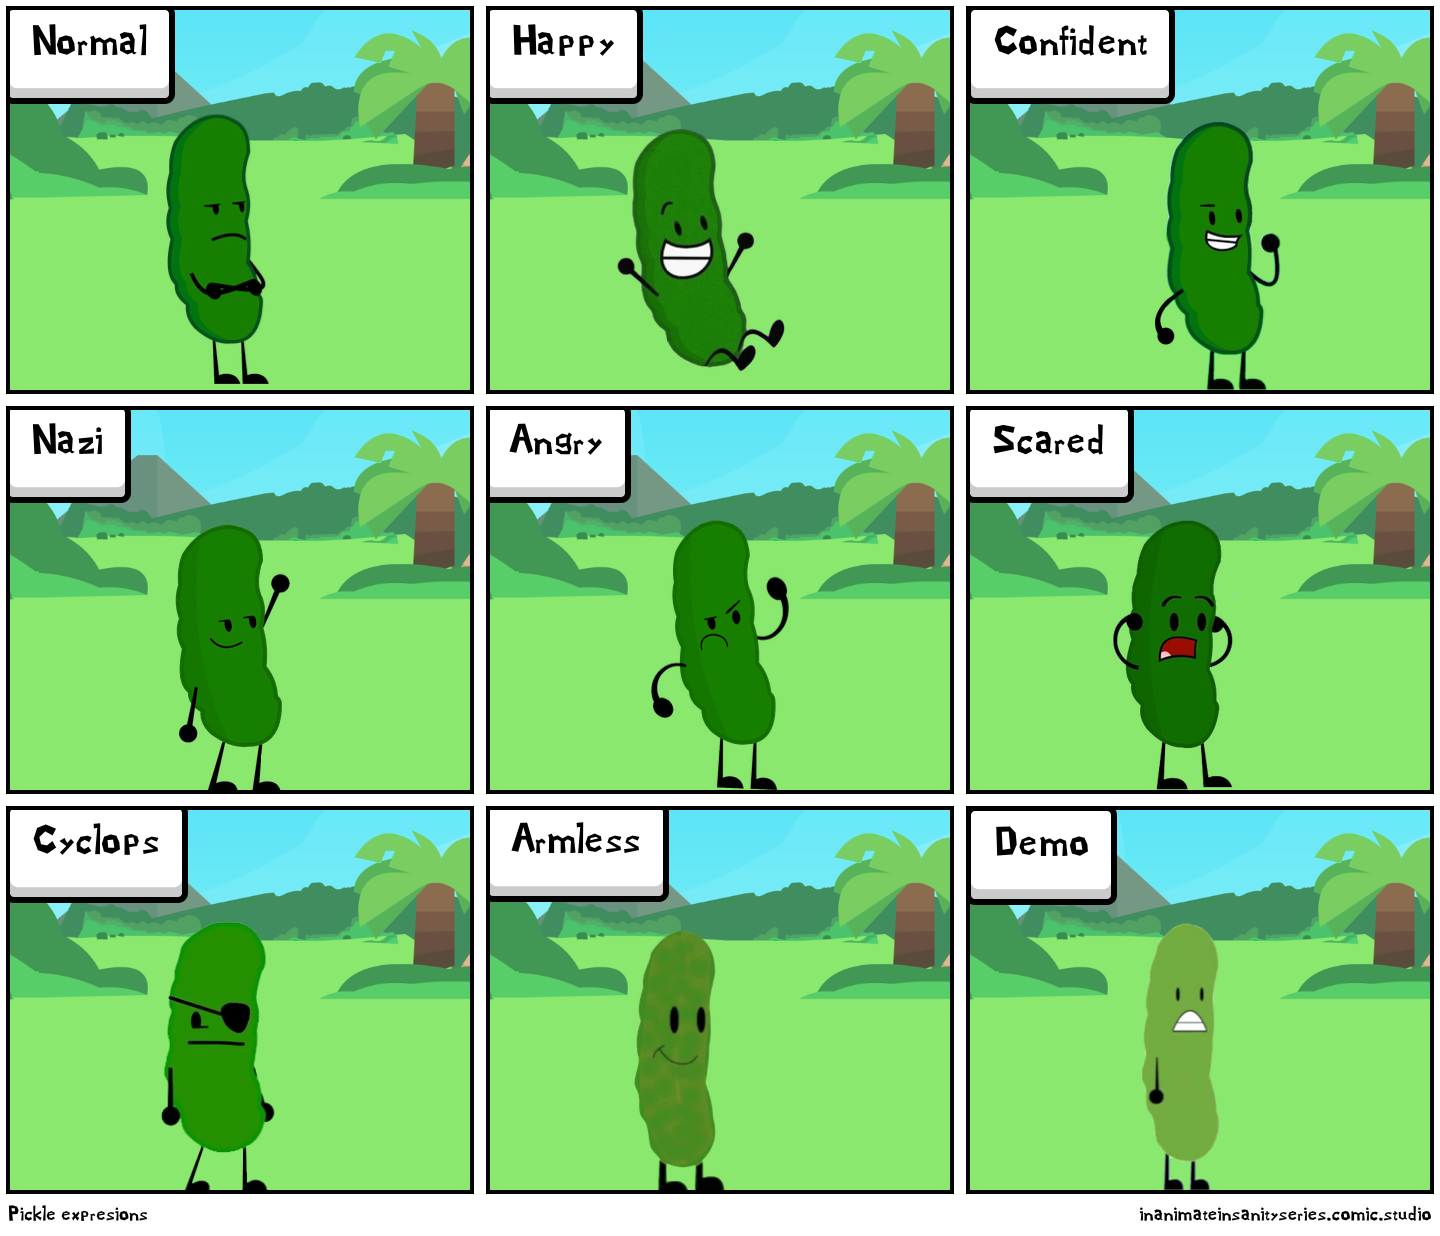 Pickle expresions